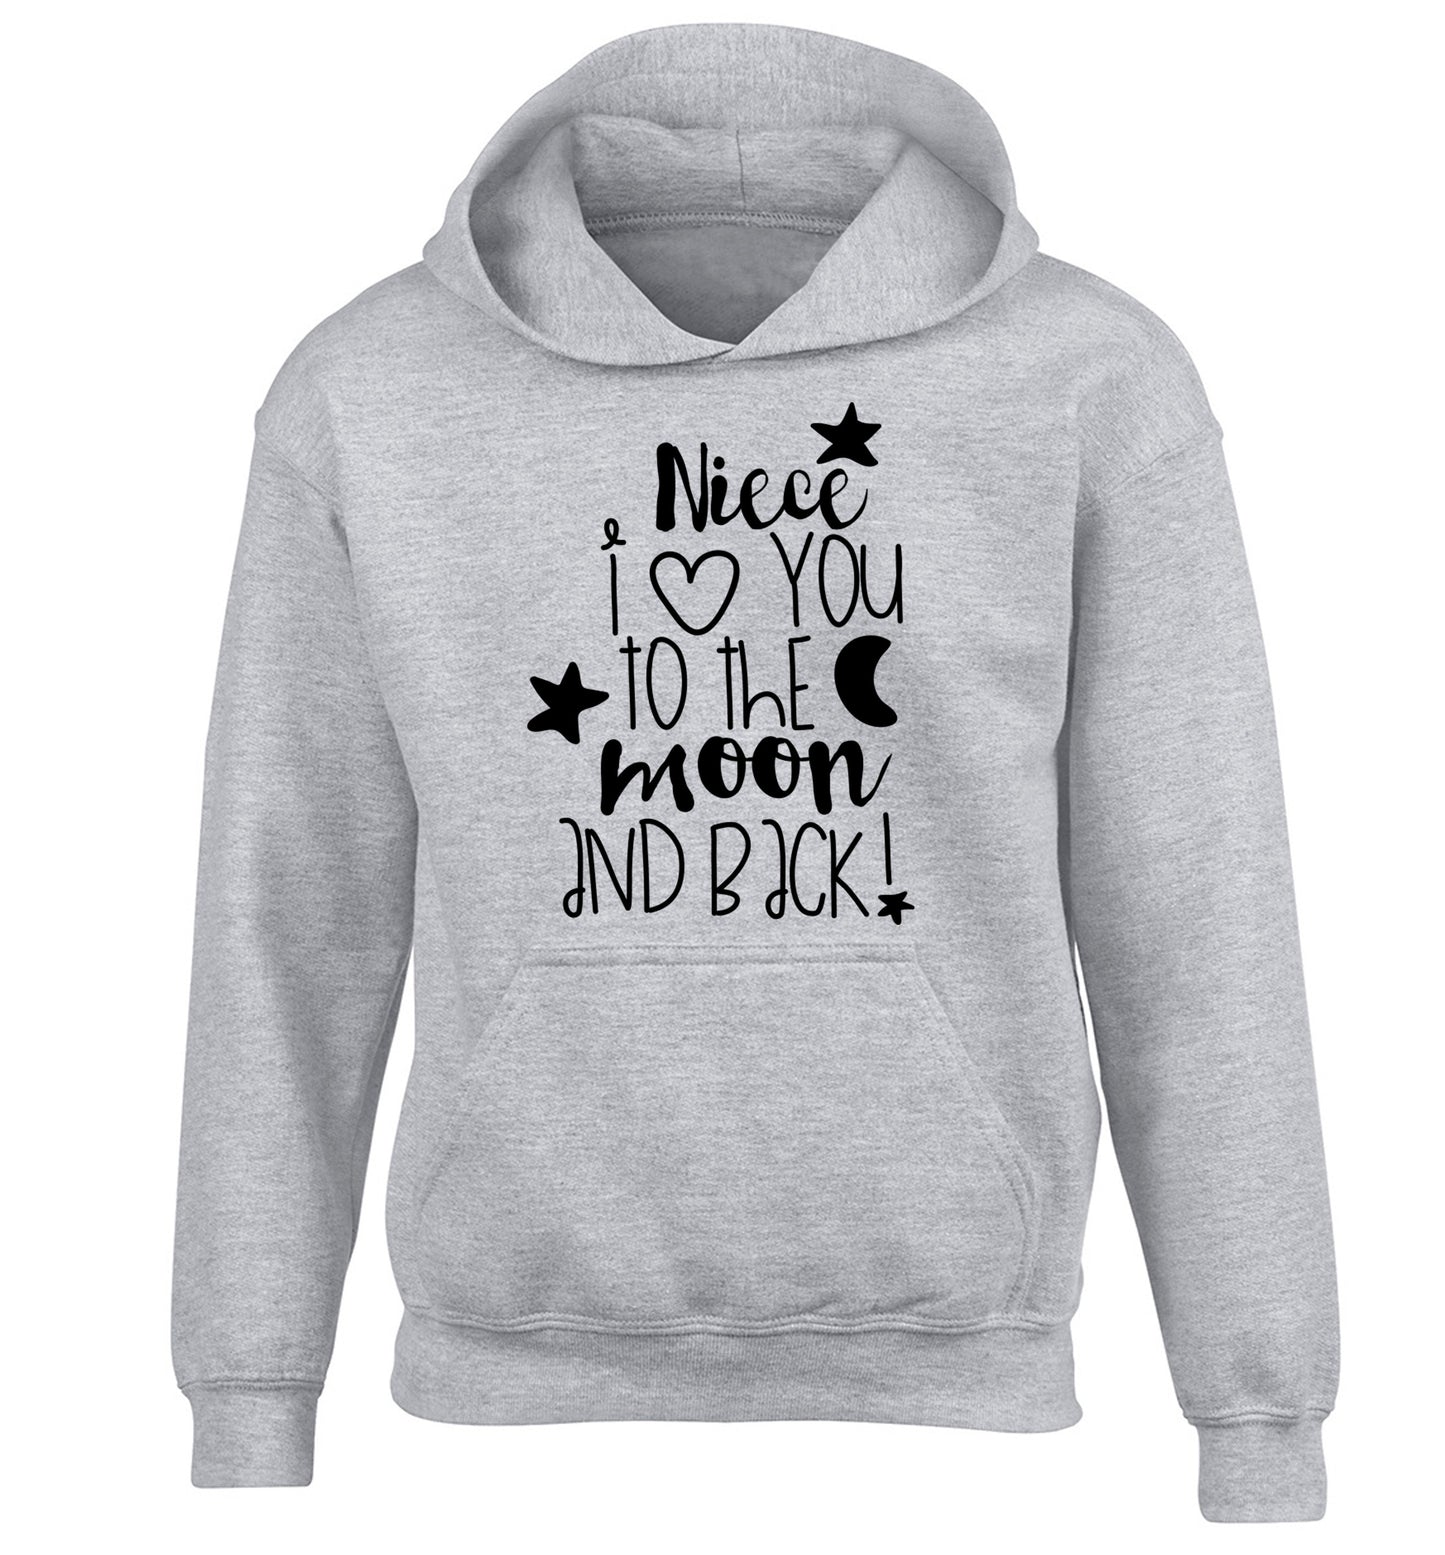 Niece I love you to the moon and back children's grey hoodie 12-14 Years